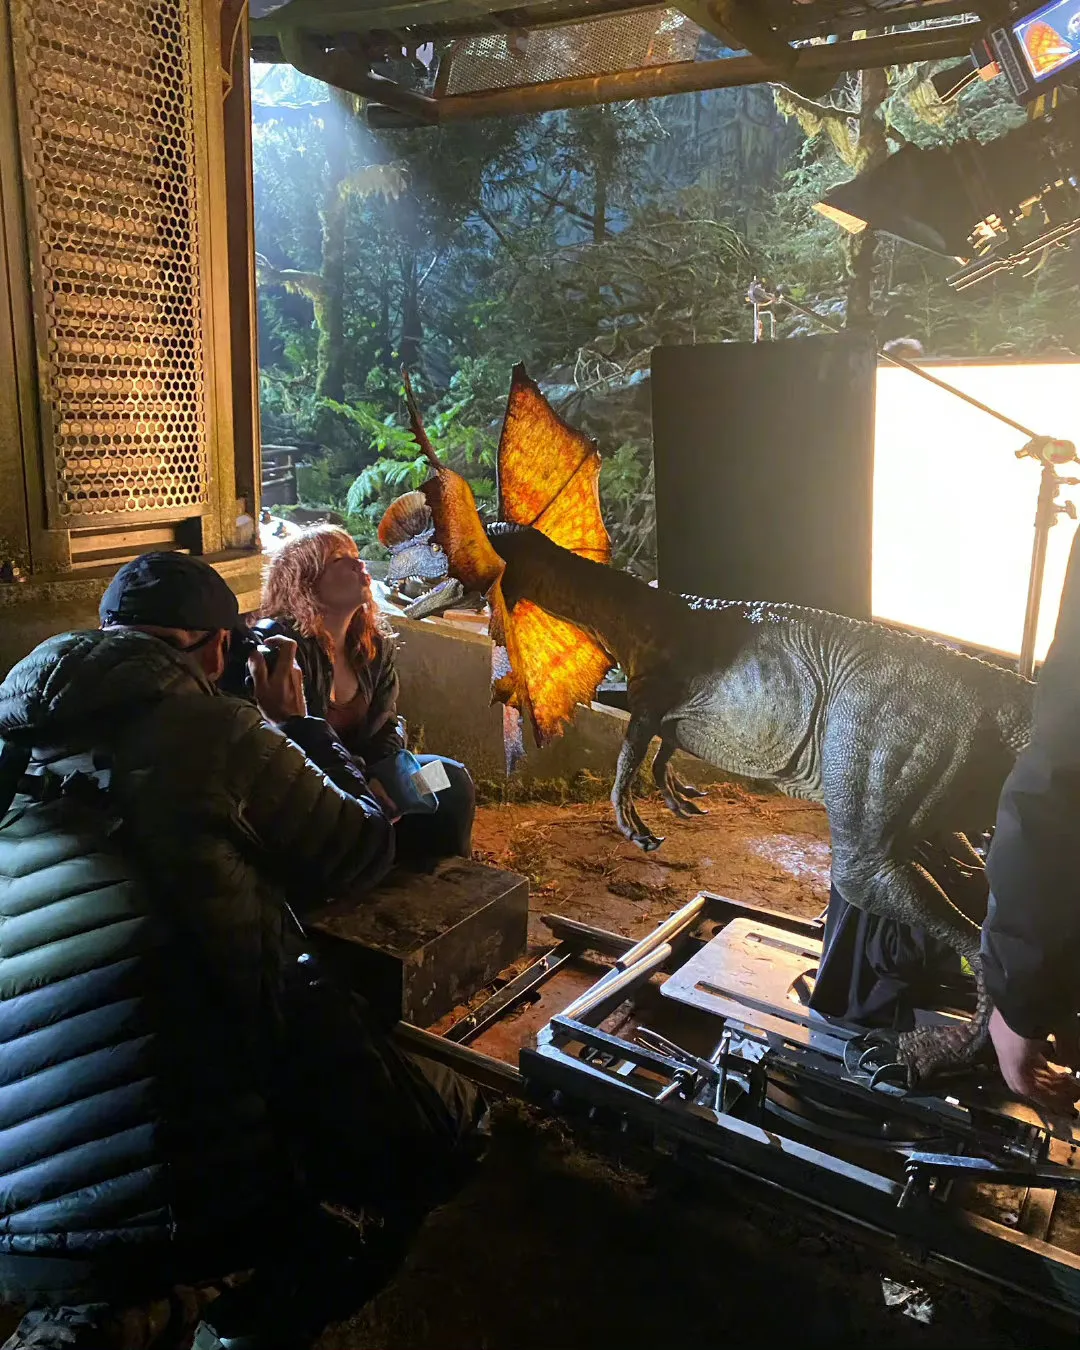 Bryce Dallas Howard shares behind-the-scenes photos of 'Jurassic World: Dominion' to thank fans | FMV6